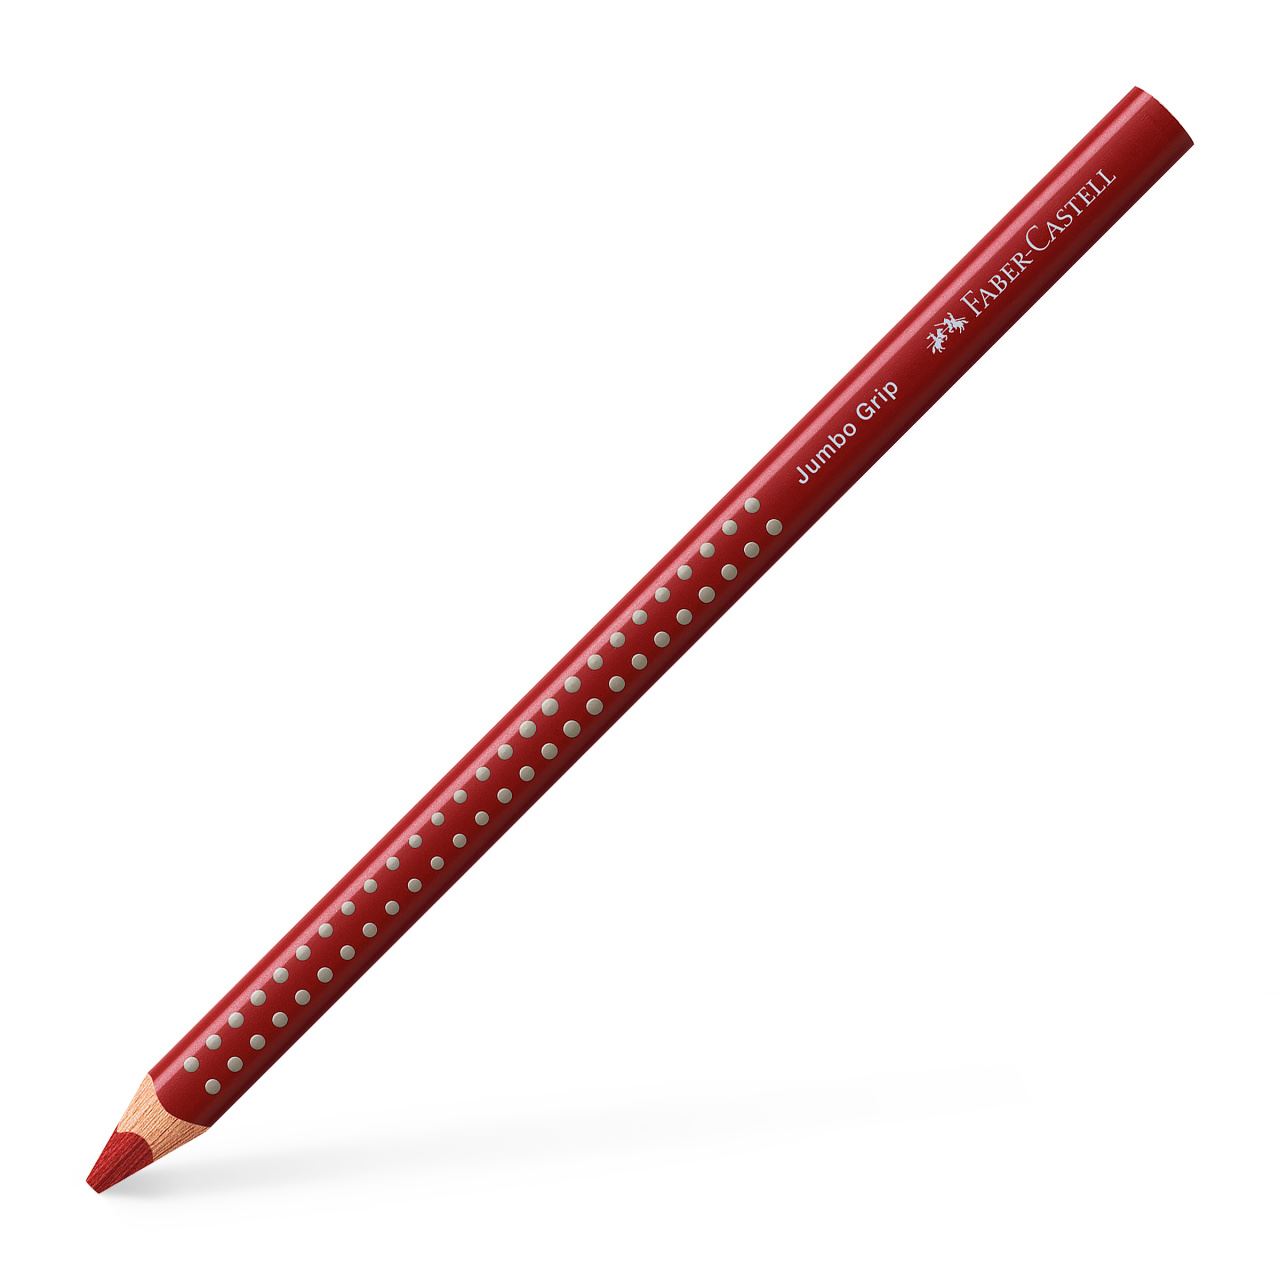 Faber-Castell - Matite Colorate Jumbo Grip rosso indiano